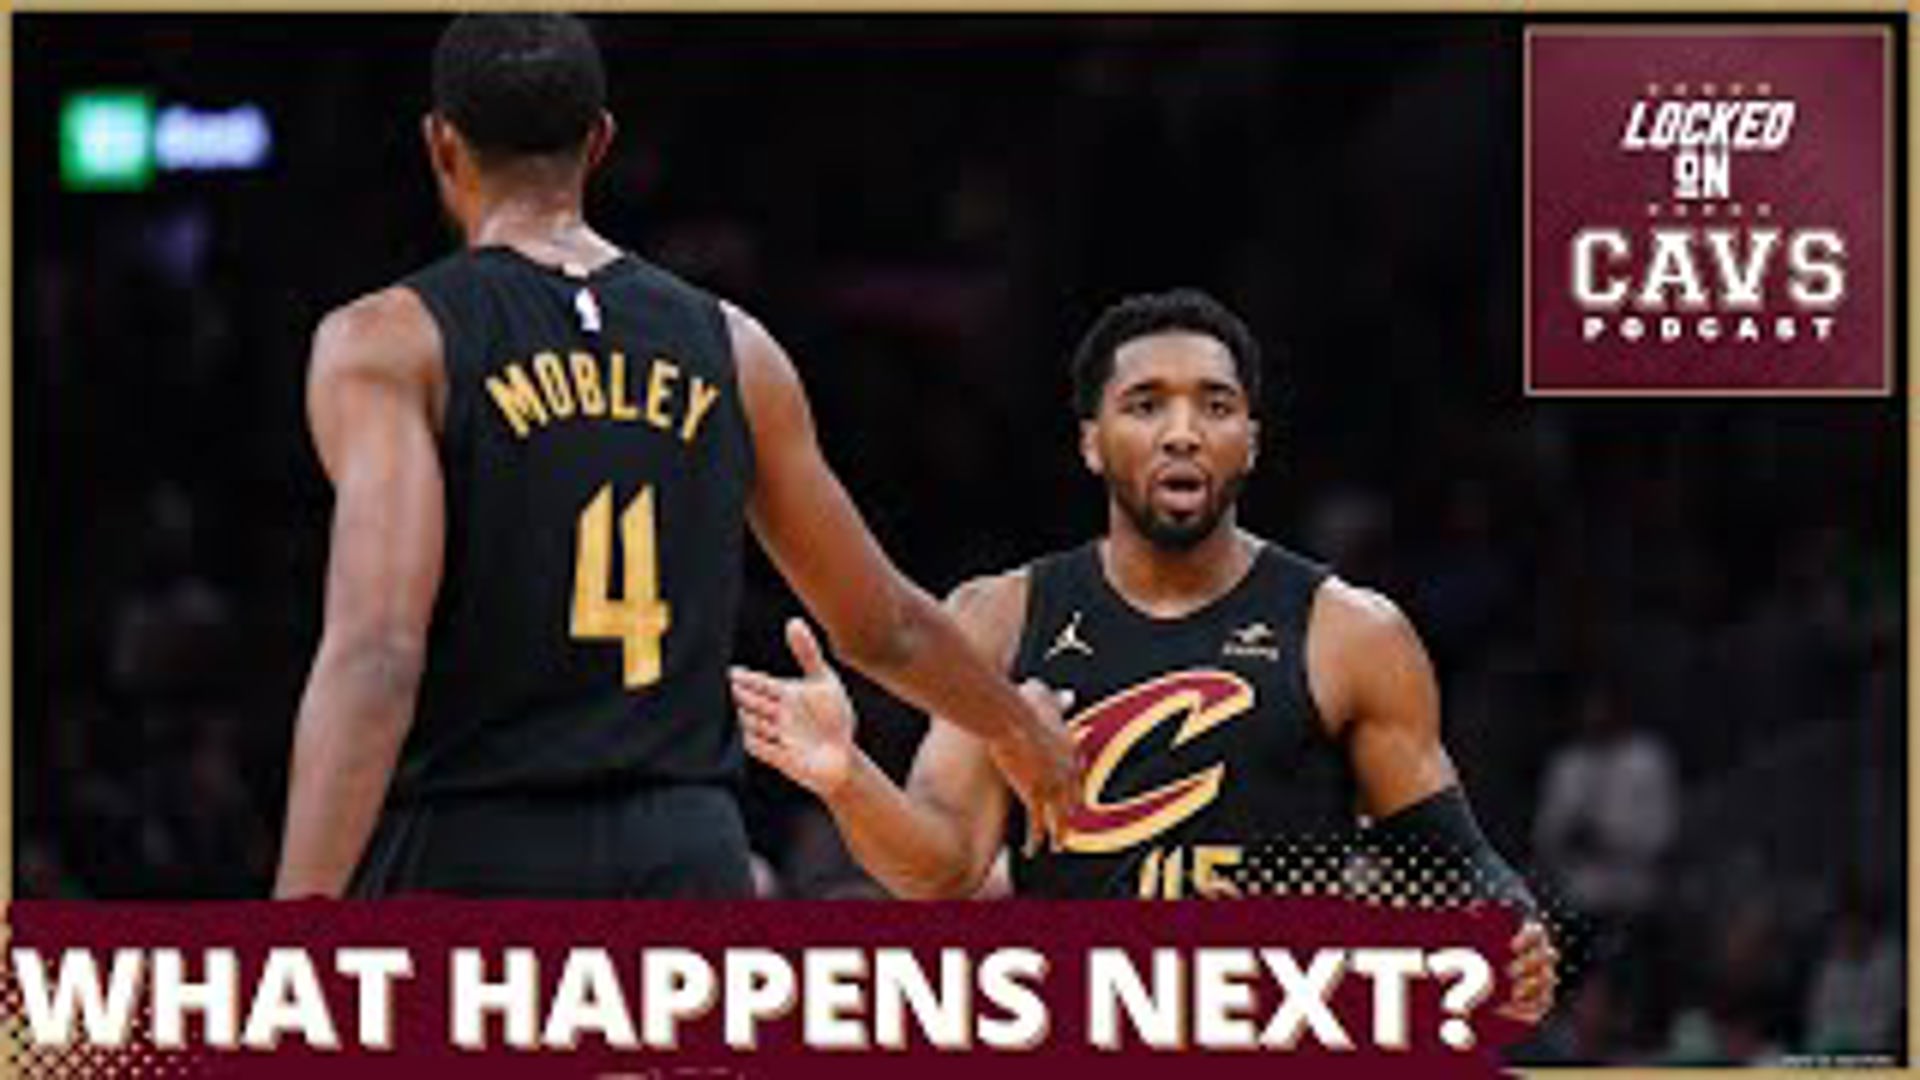 On a new episode of Locked on Cavs, hosts Evan Dammarrell and Chris Manning look towards the next domino to fall in Cleveland's offseason.